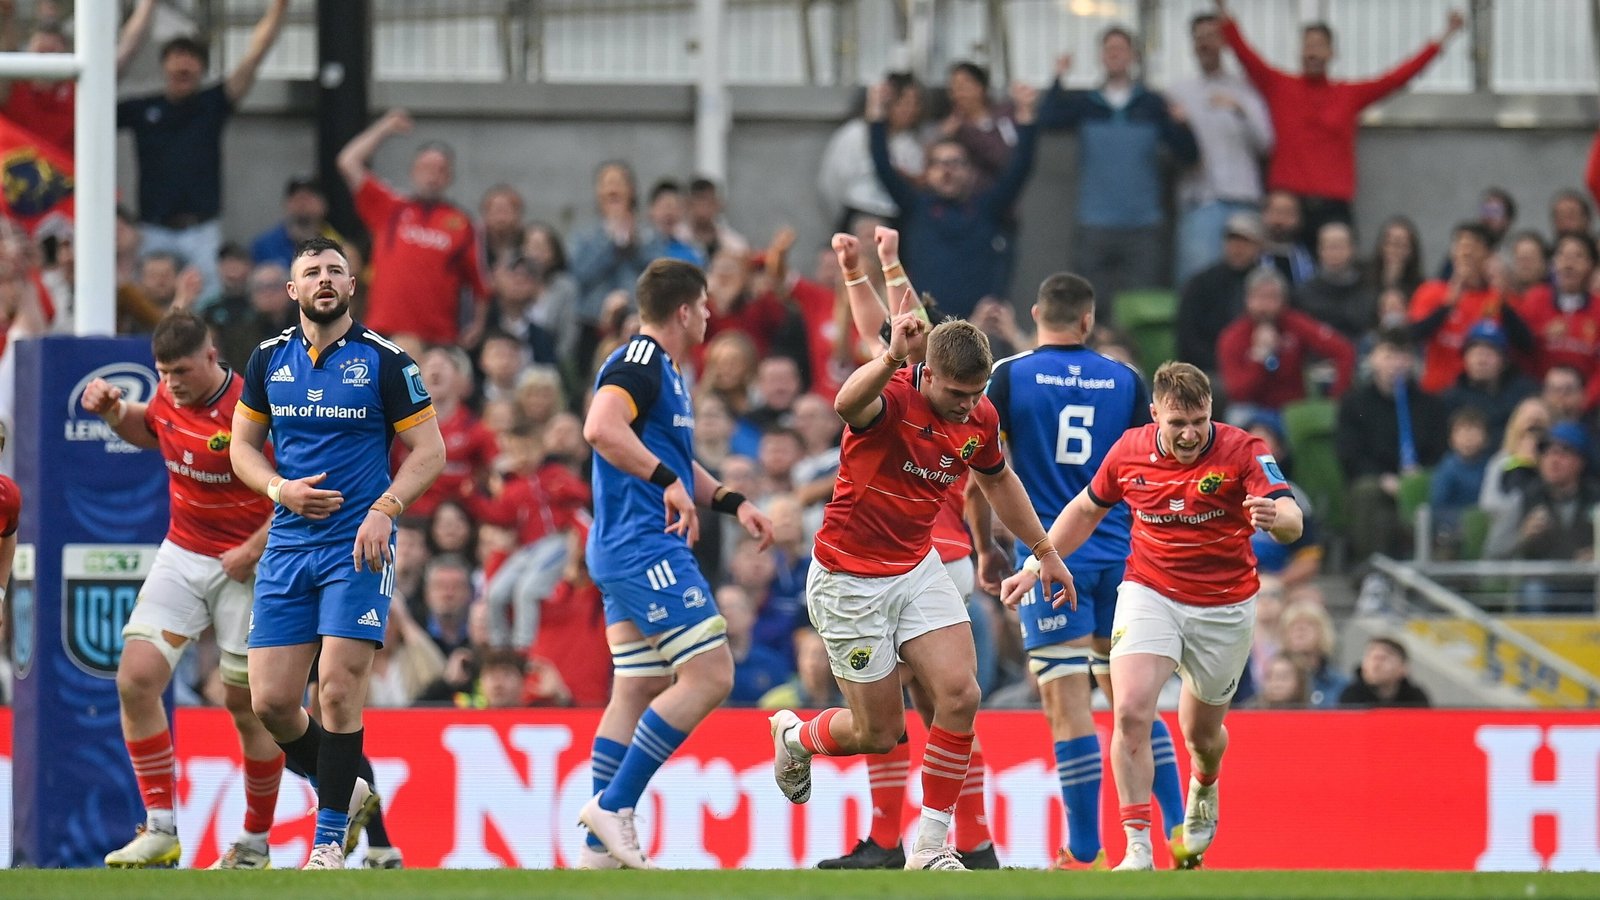 Munster reach URC final with famous win over Leinster